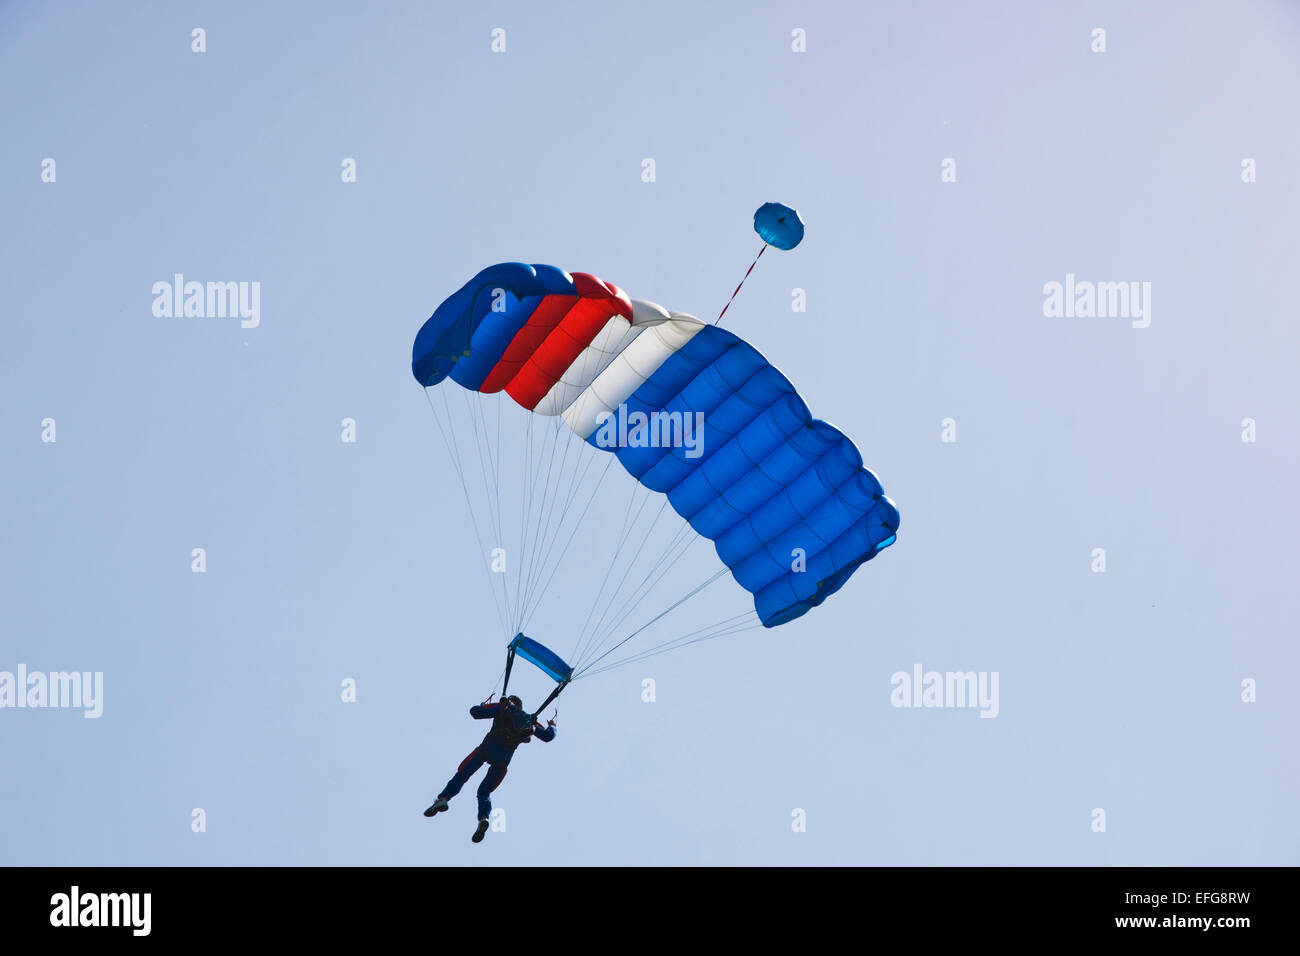 Parachutist jumping on a background of blue sky Stock Photo